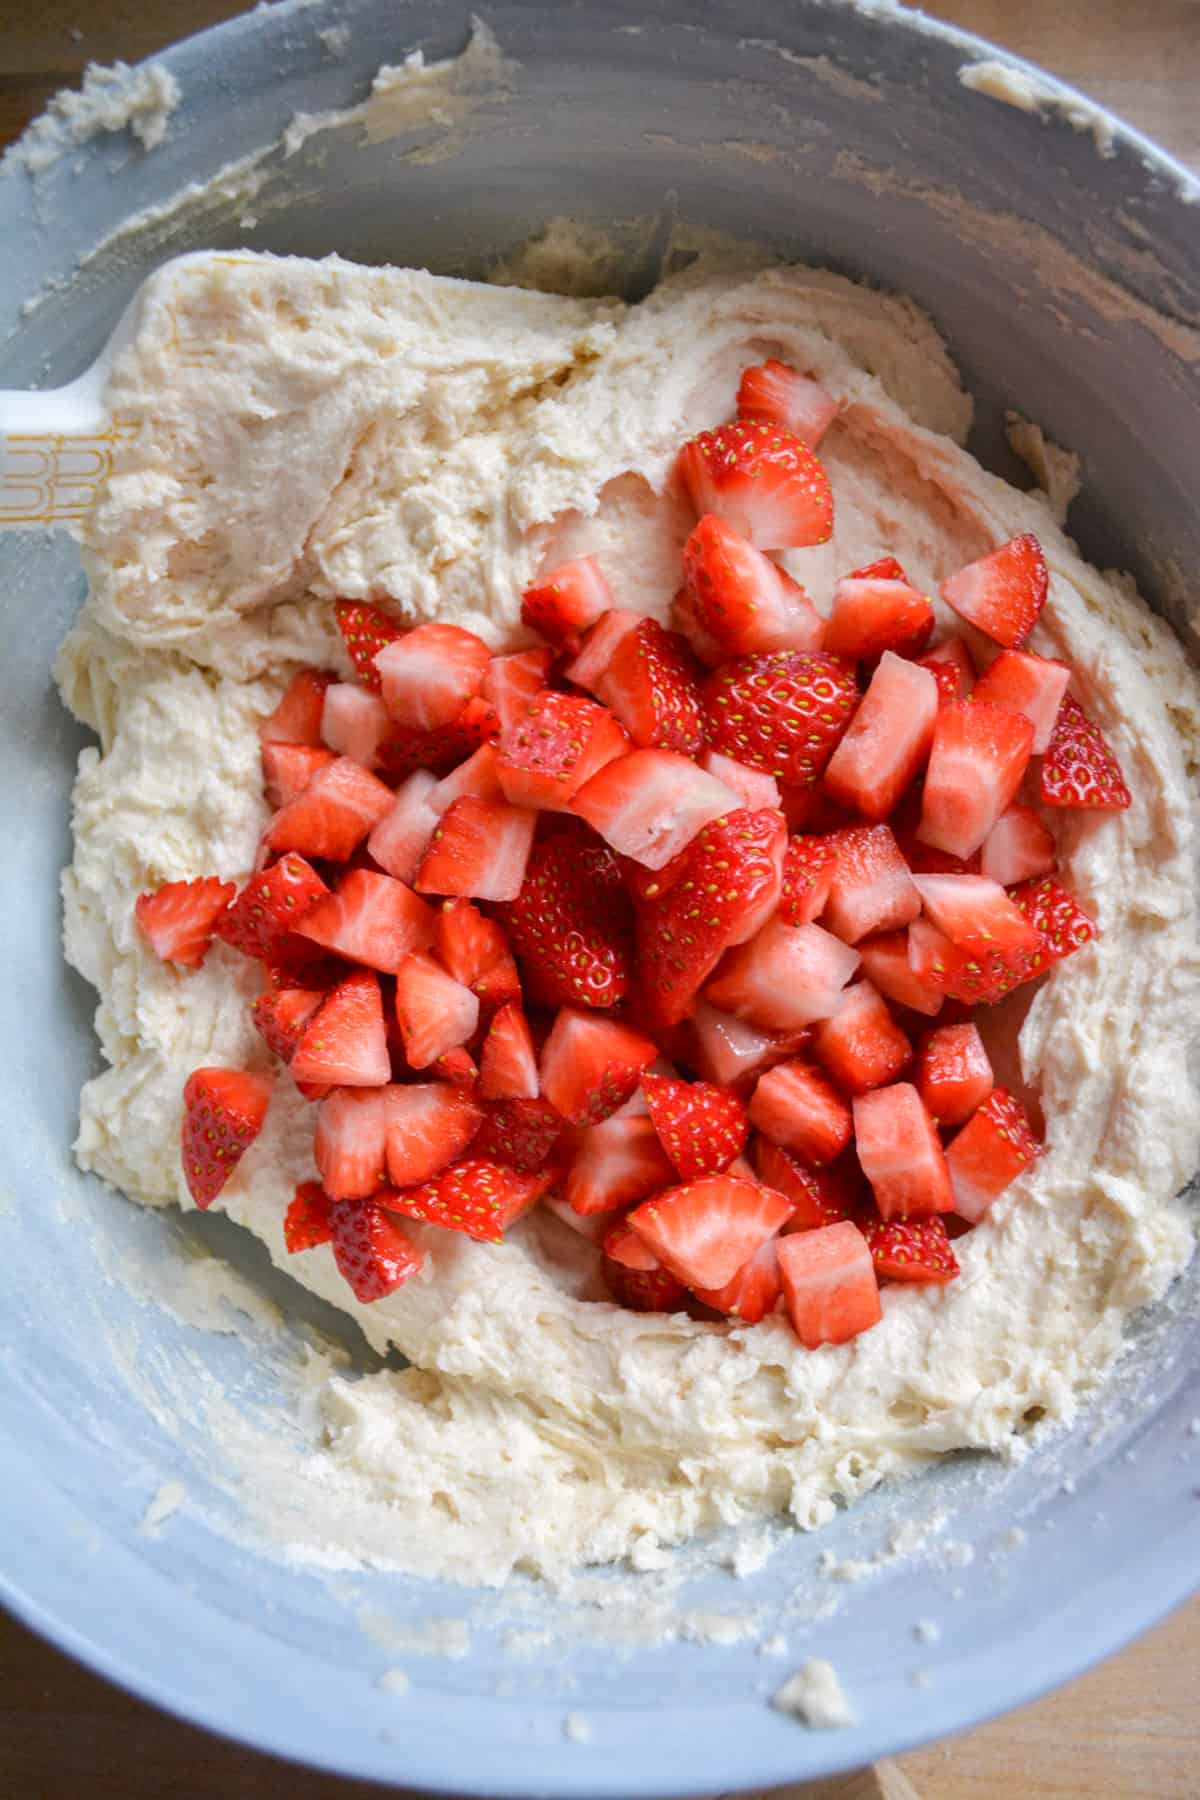 The remaining dry ingredients mixed into the pound cake batter and chopped strawberries added in.